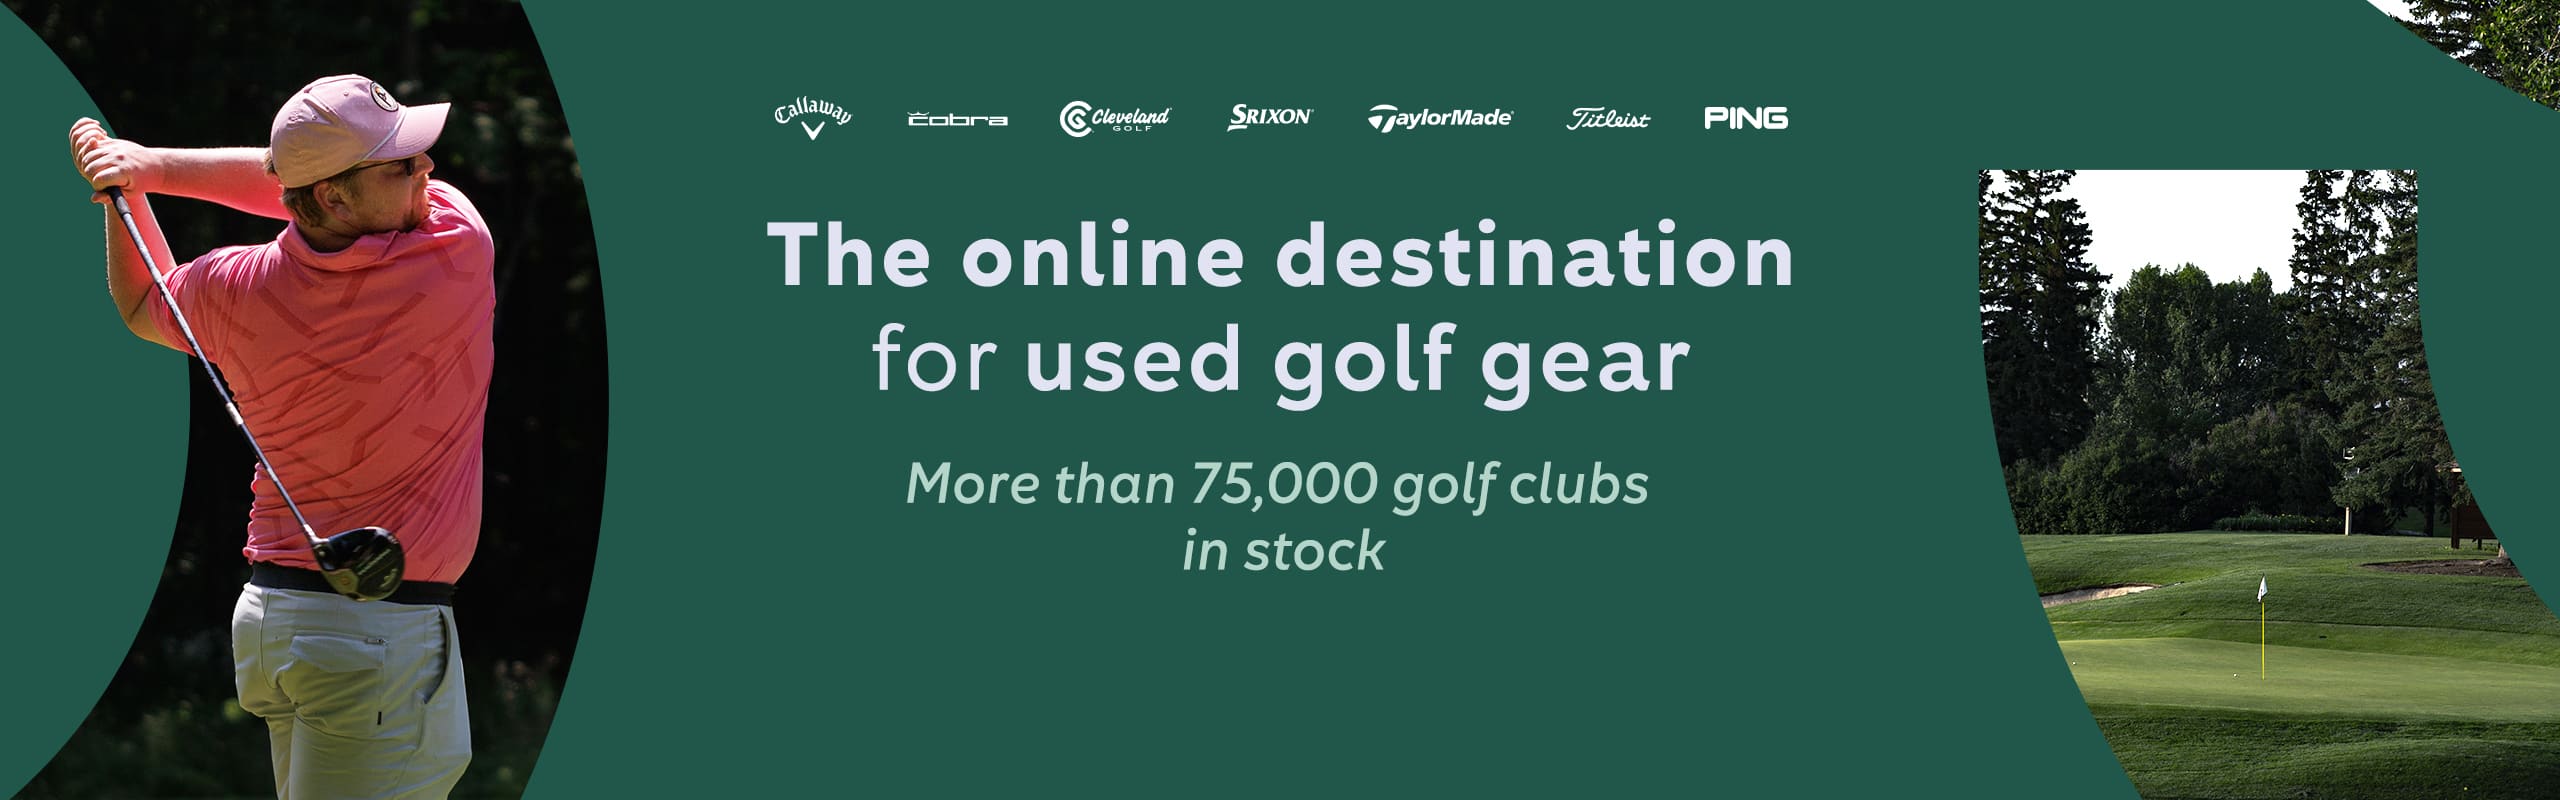 Golf Avenue Pre-Loved Clubs and Equipment for Sale Online